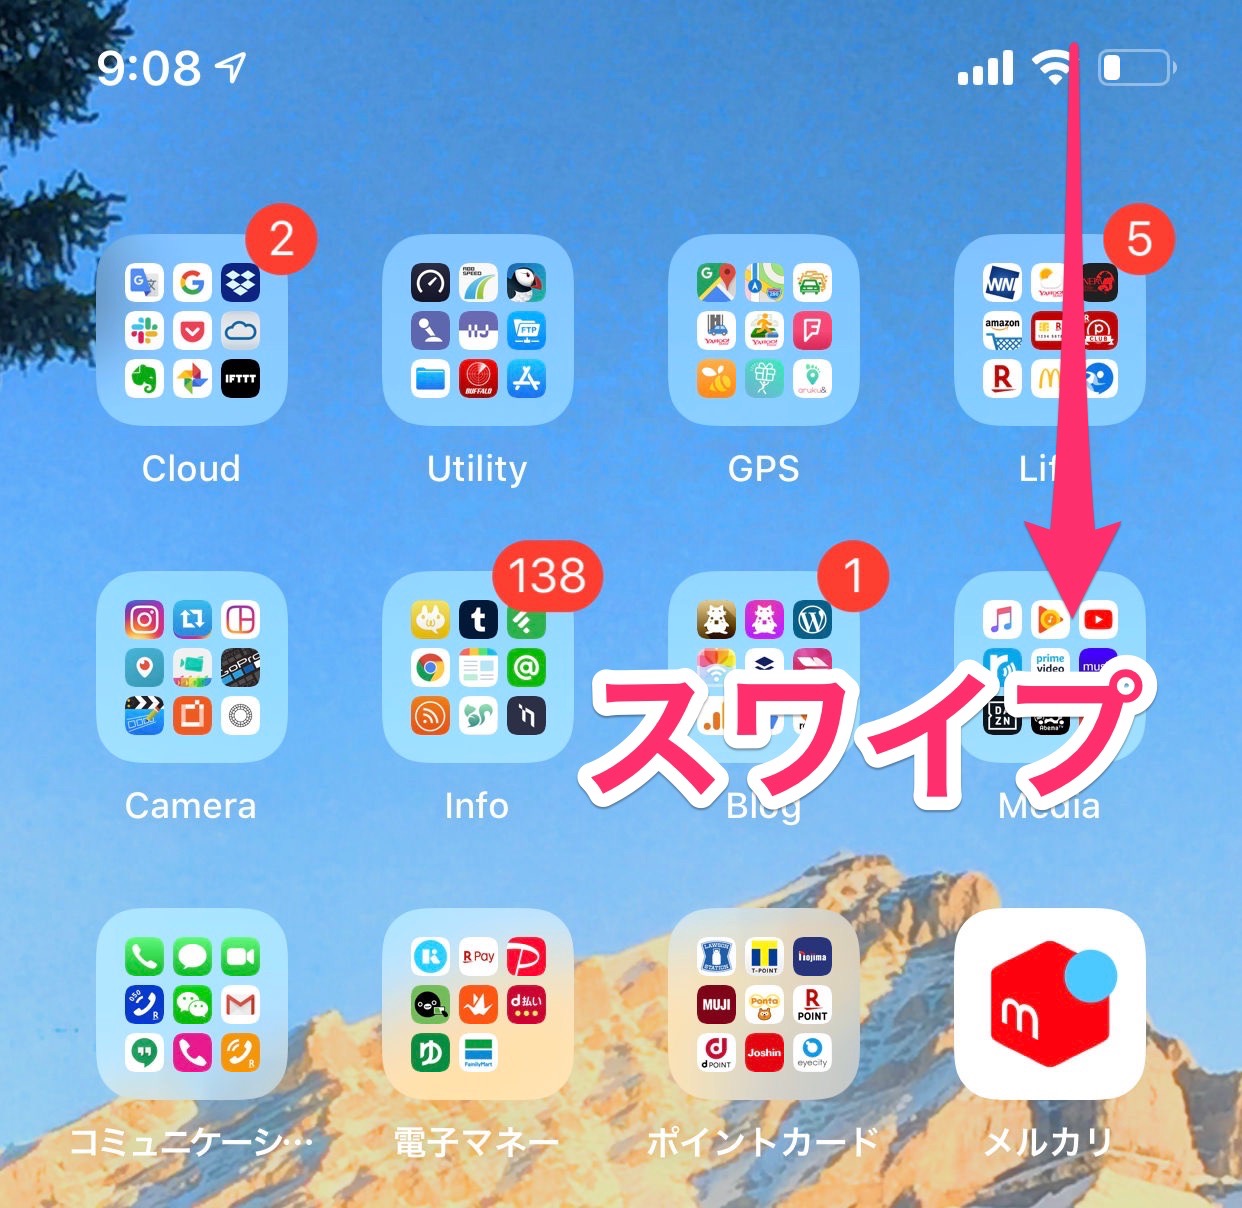 【iPhone】バッテリー残量をパーセント（%）で表示する方法【X/XS/XR/11/11 Pro】